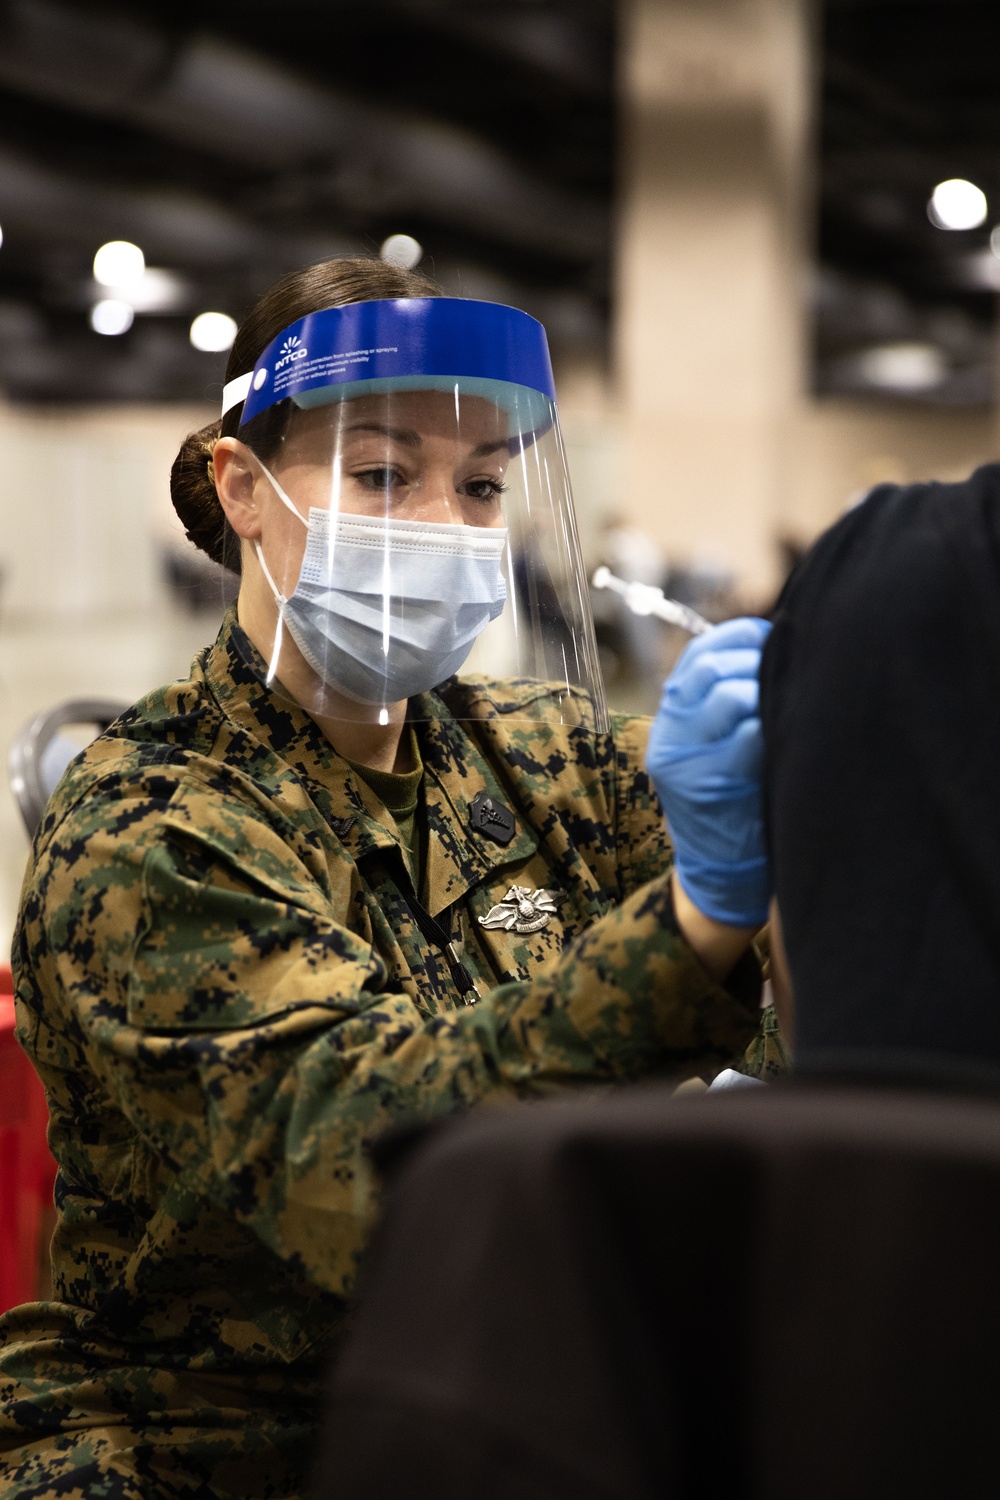 U.S. Marines and Sailors continue vaccination efforts at the Community Vaccination Center in Philadelphia